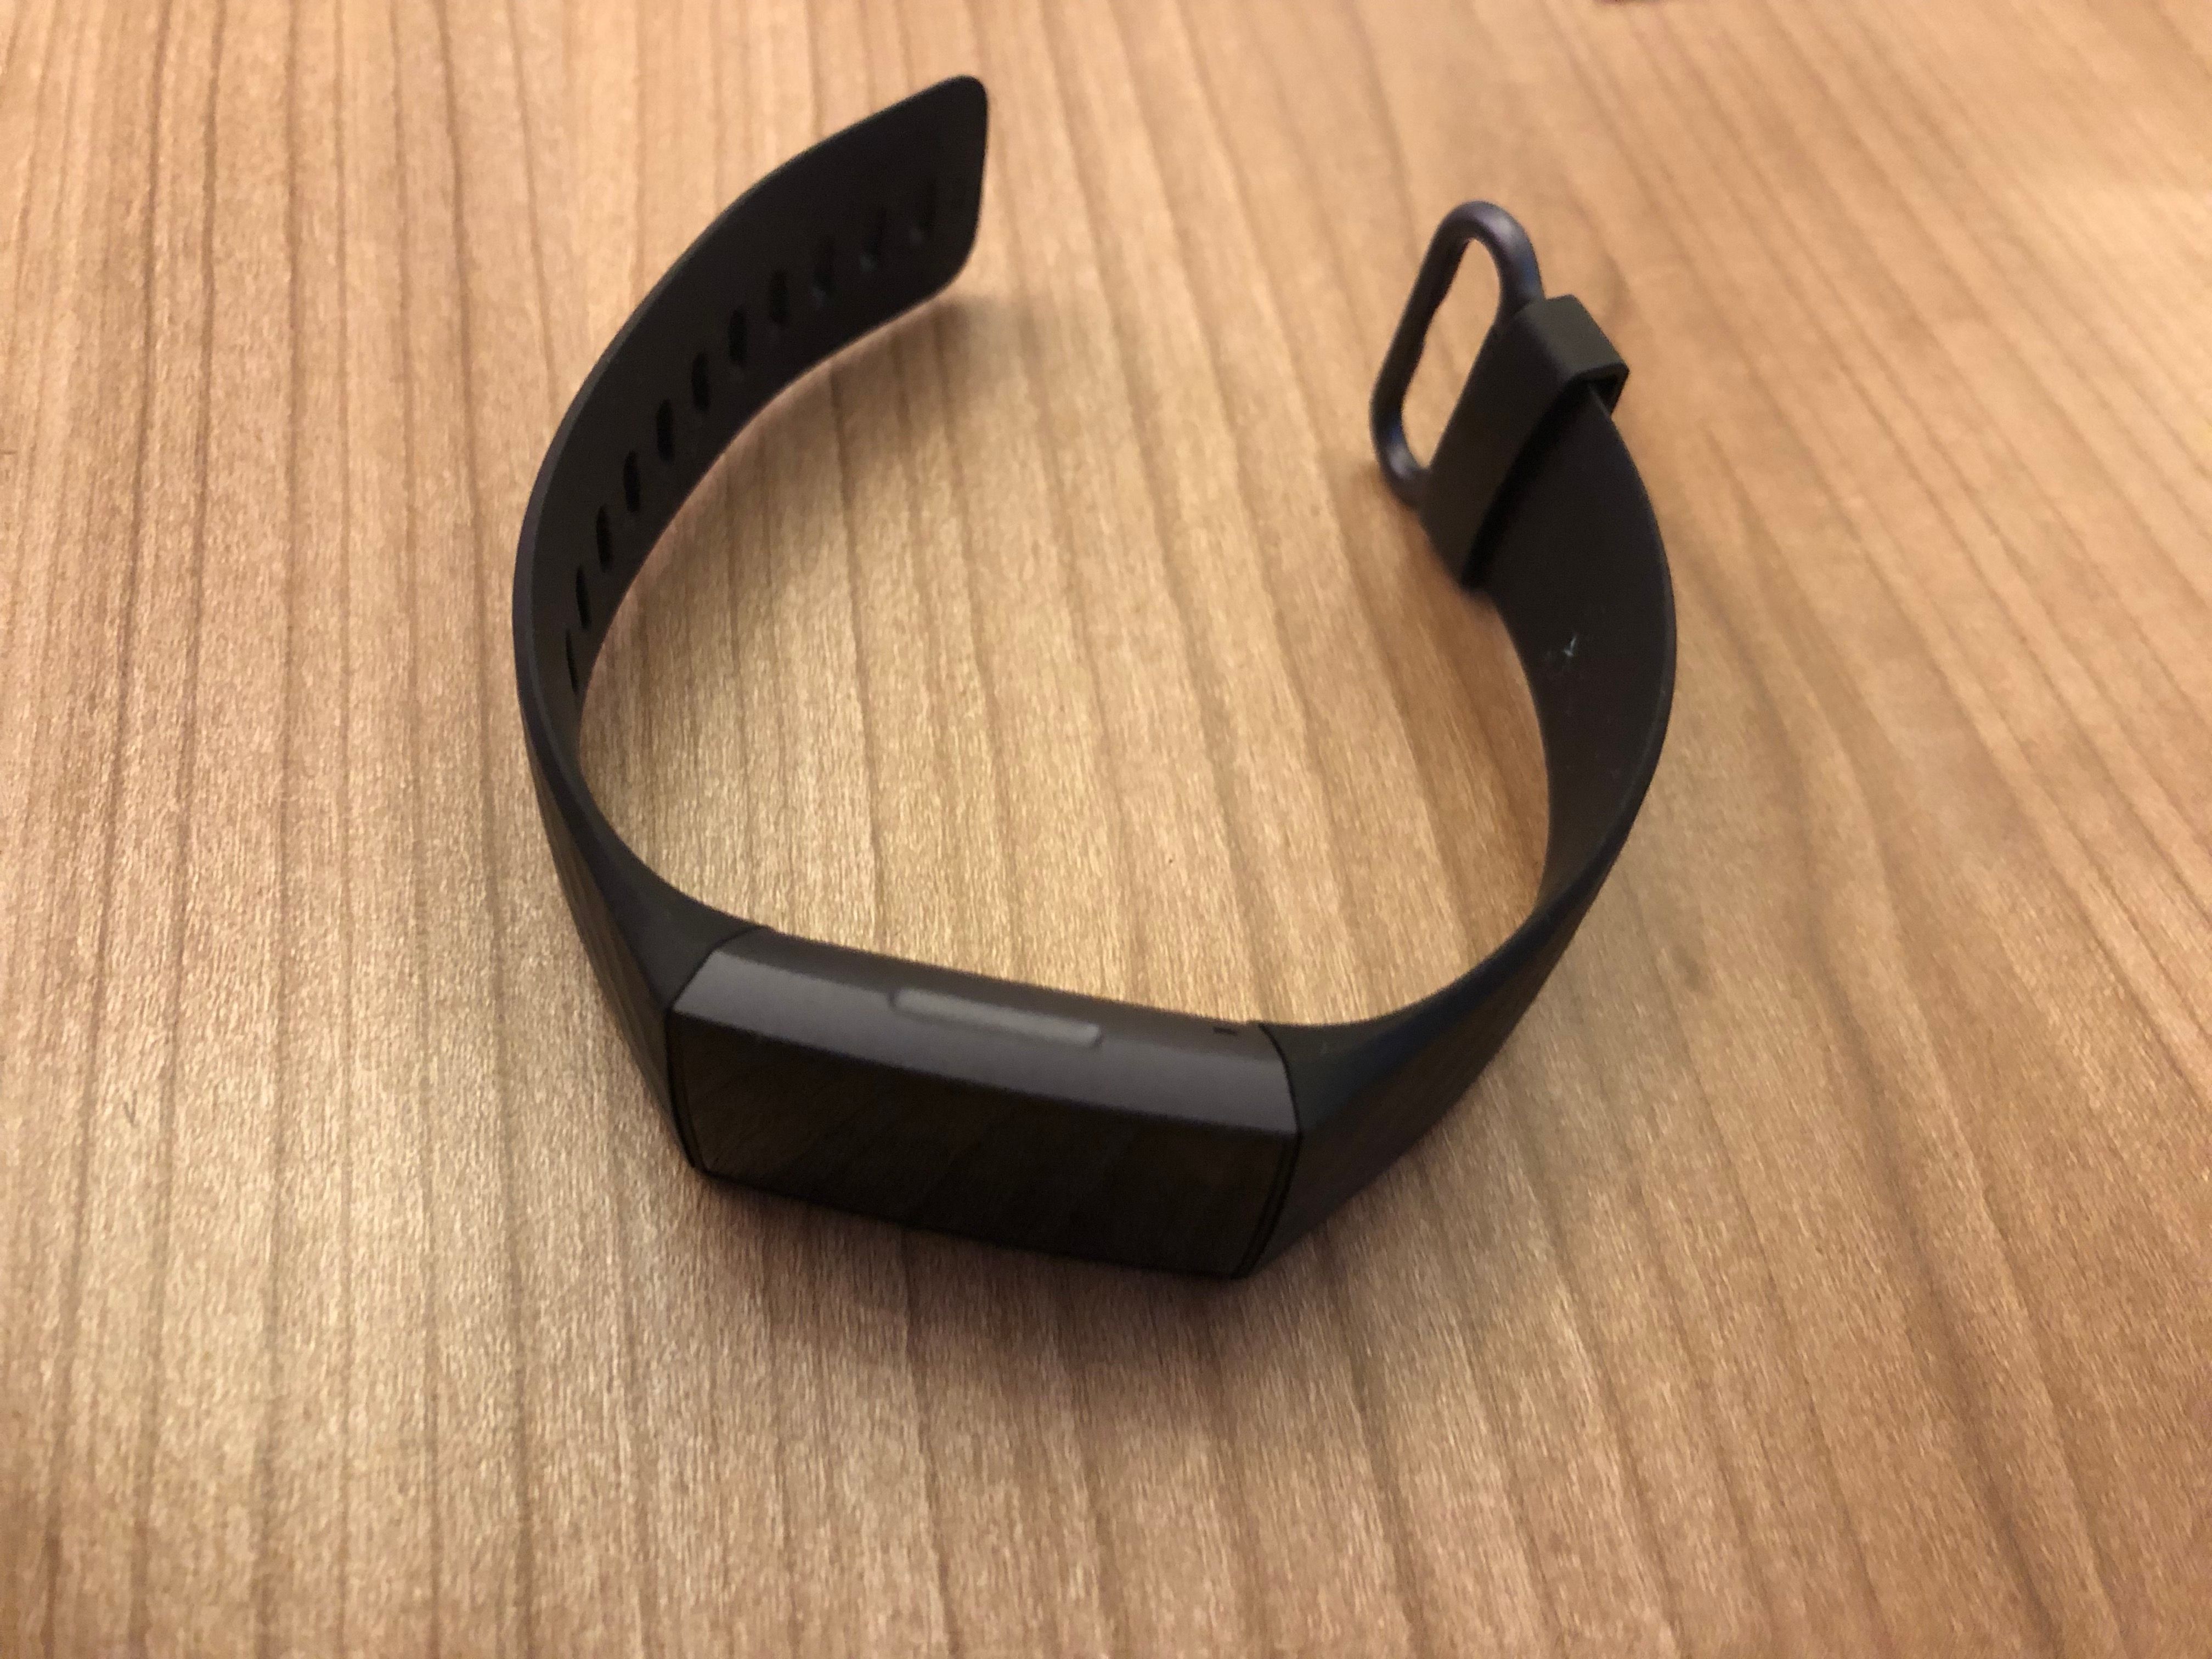 fitbit charge 3 has black screen